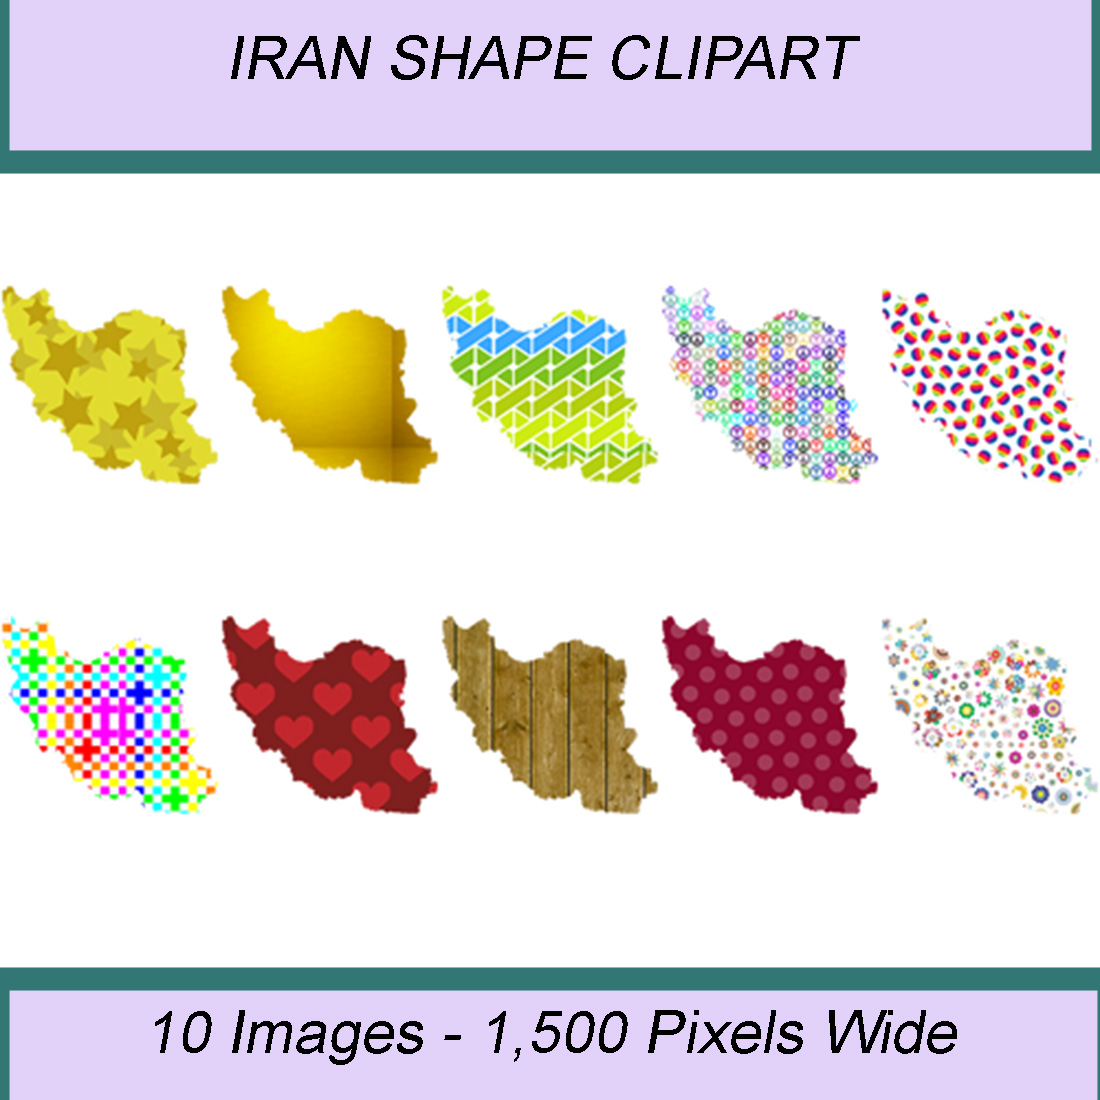 IRAN SHAPE CLIPART ICONS cover image.